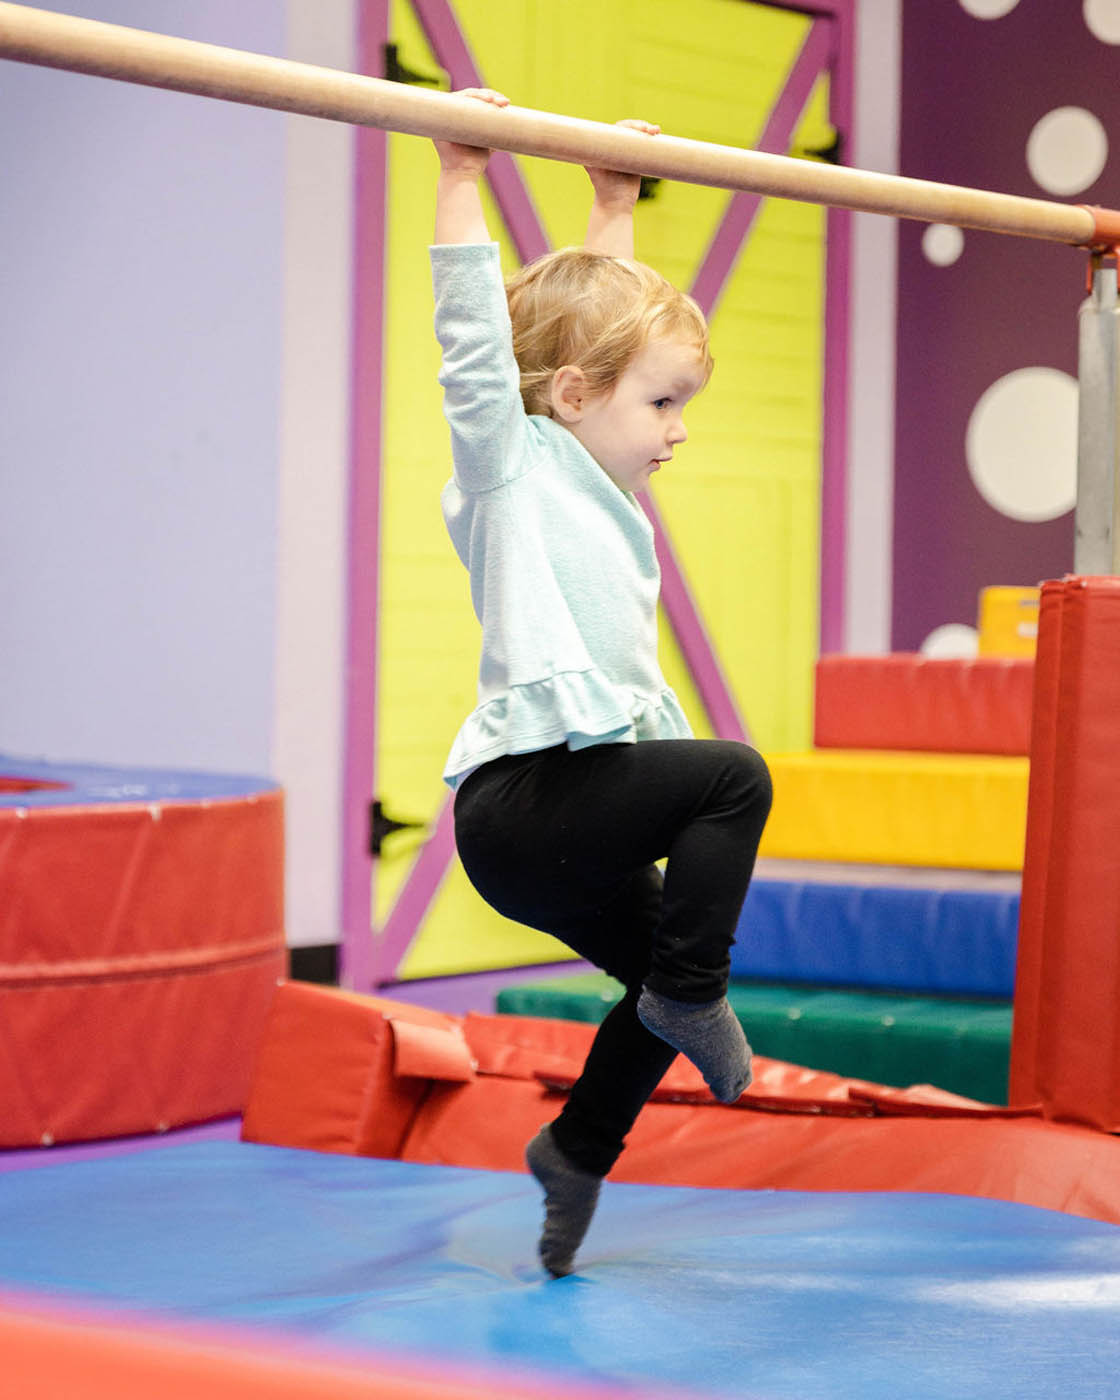 A kid swining from Romp n' Roll gym equipment - safe kids fitness classes in Willow Grove, PA.